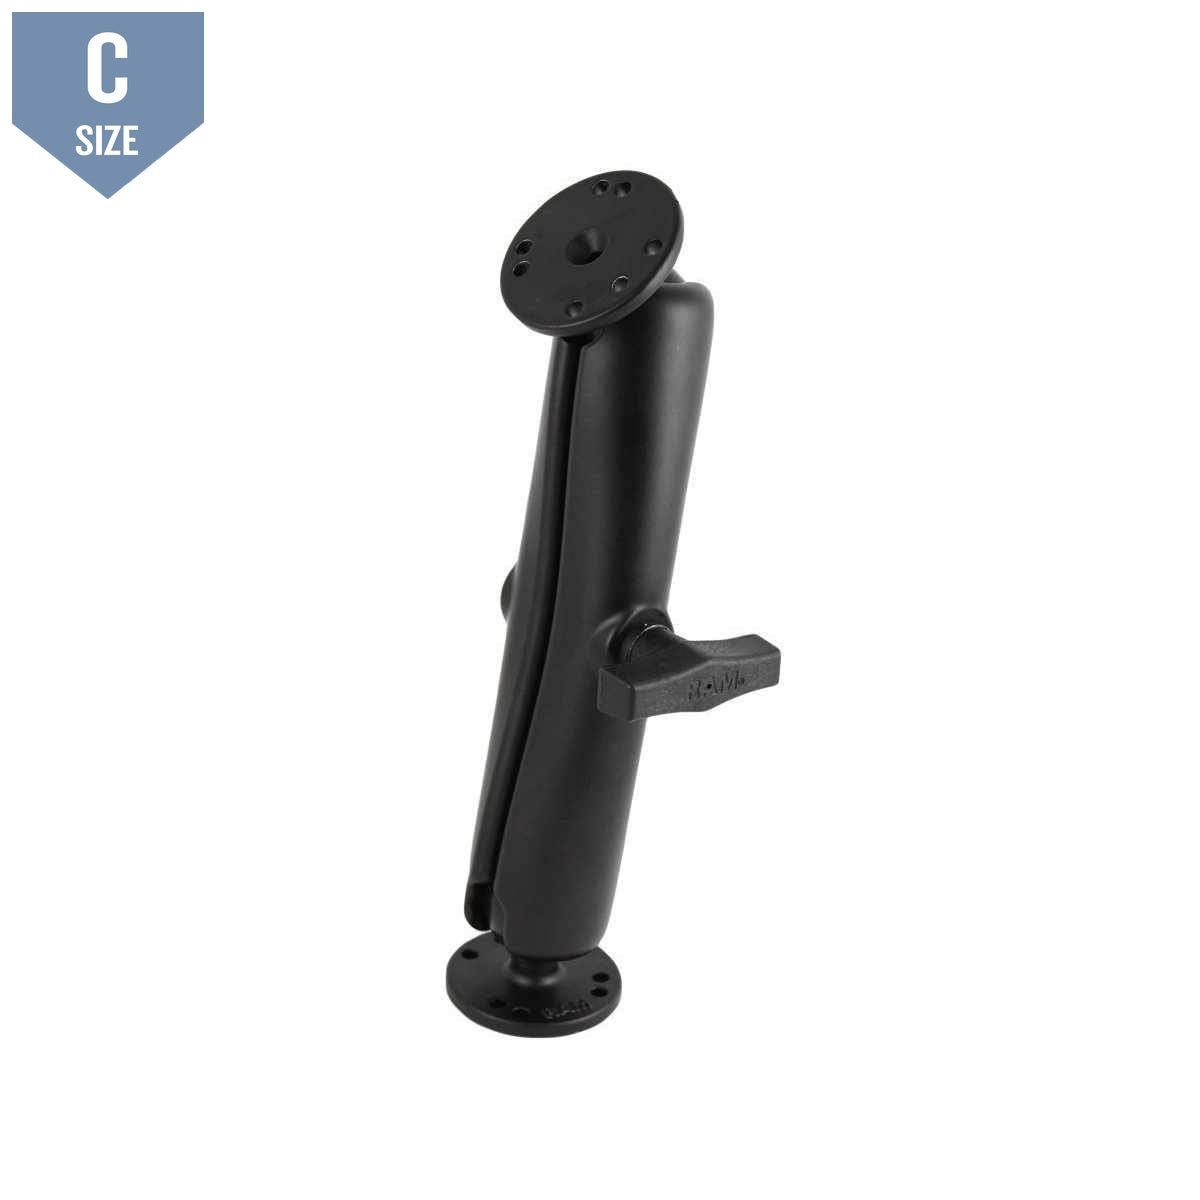 RAM Long Clamp Arm with Round Bases - C Size (RAM-101U-D) - Modest Mounts